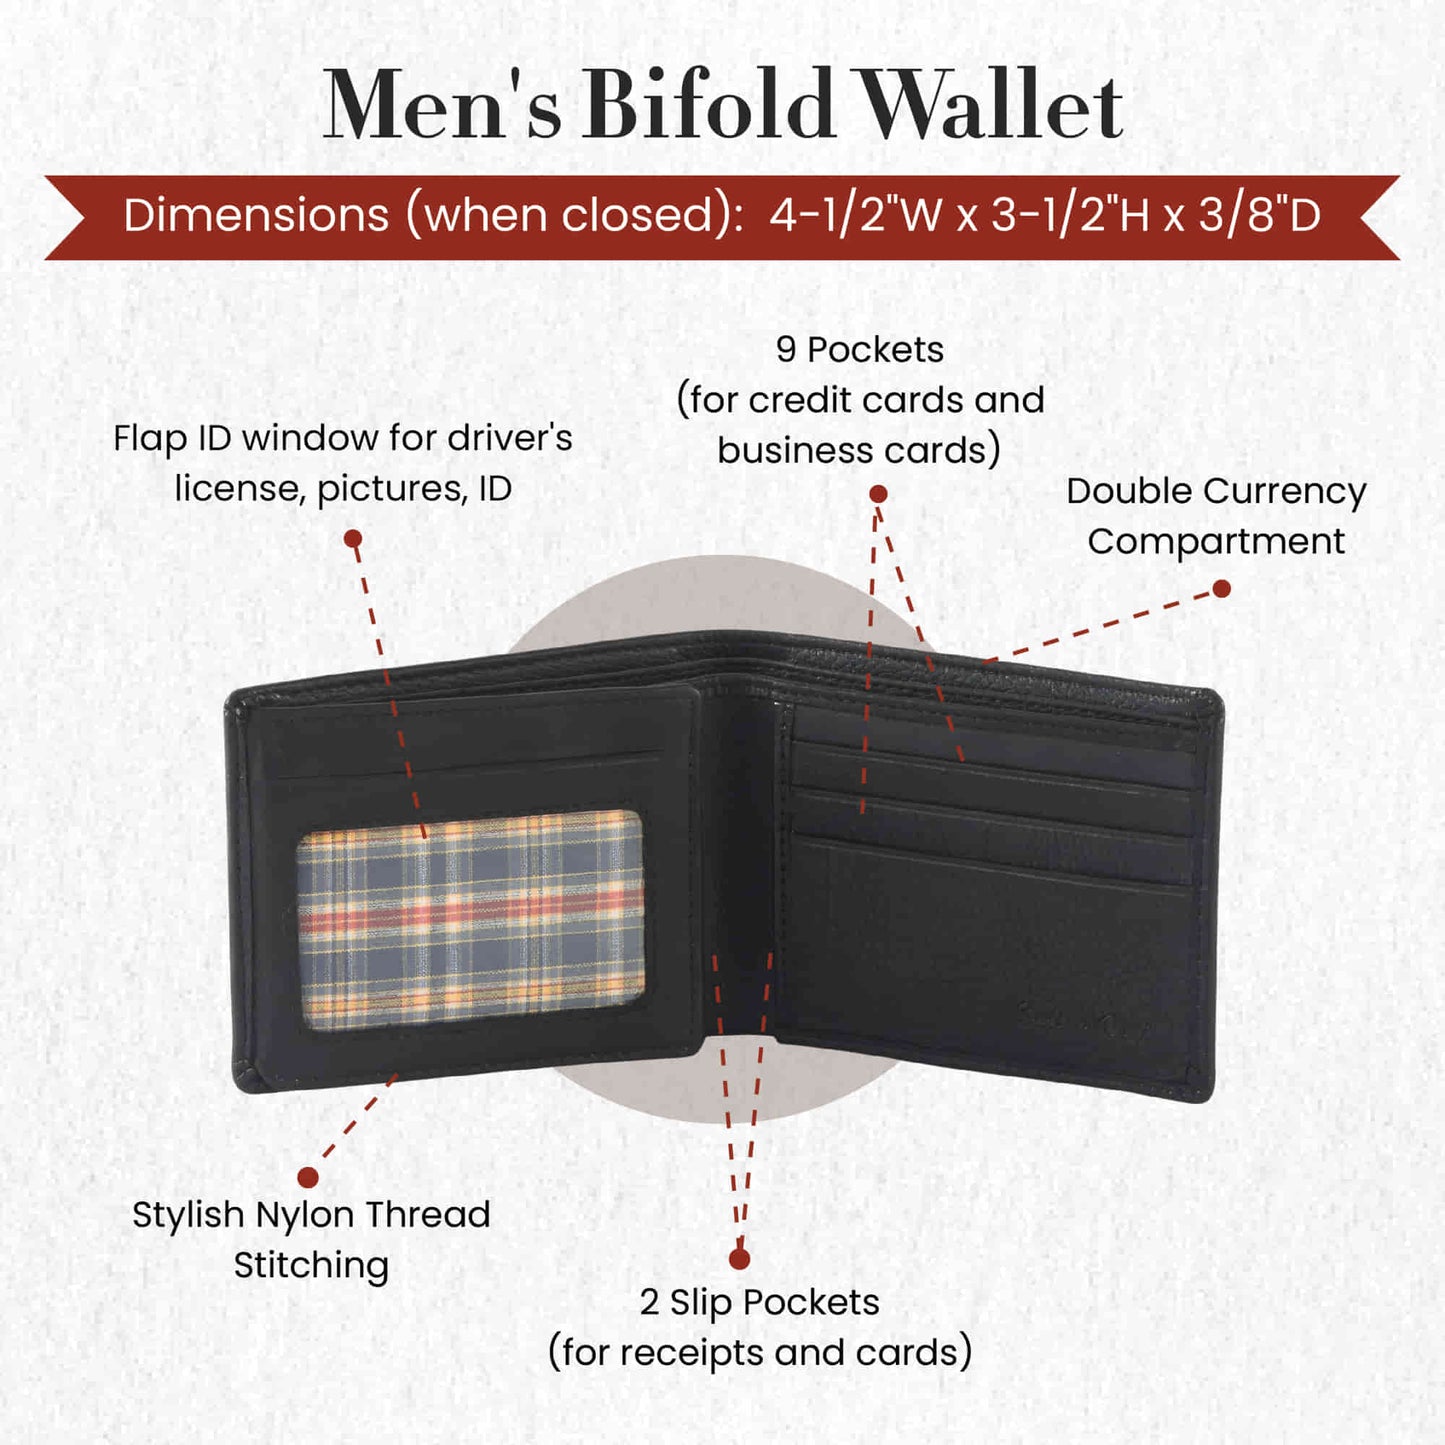 Style n Craft 200166 bifold wallet with side flap in black color full grain leather - open view showing the details